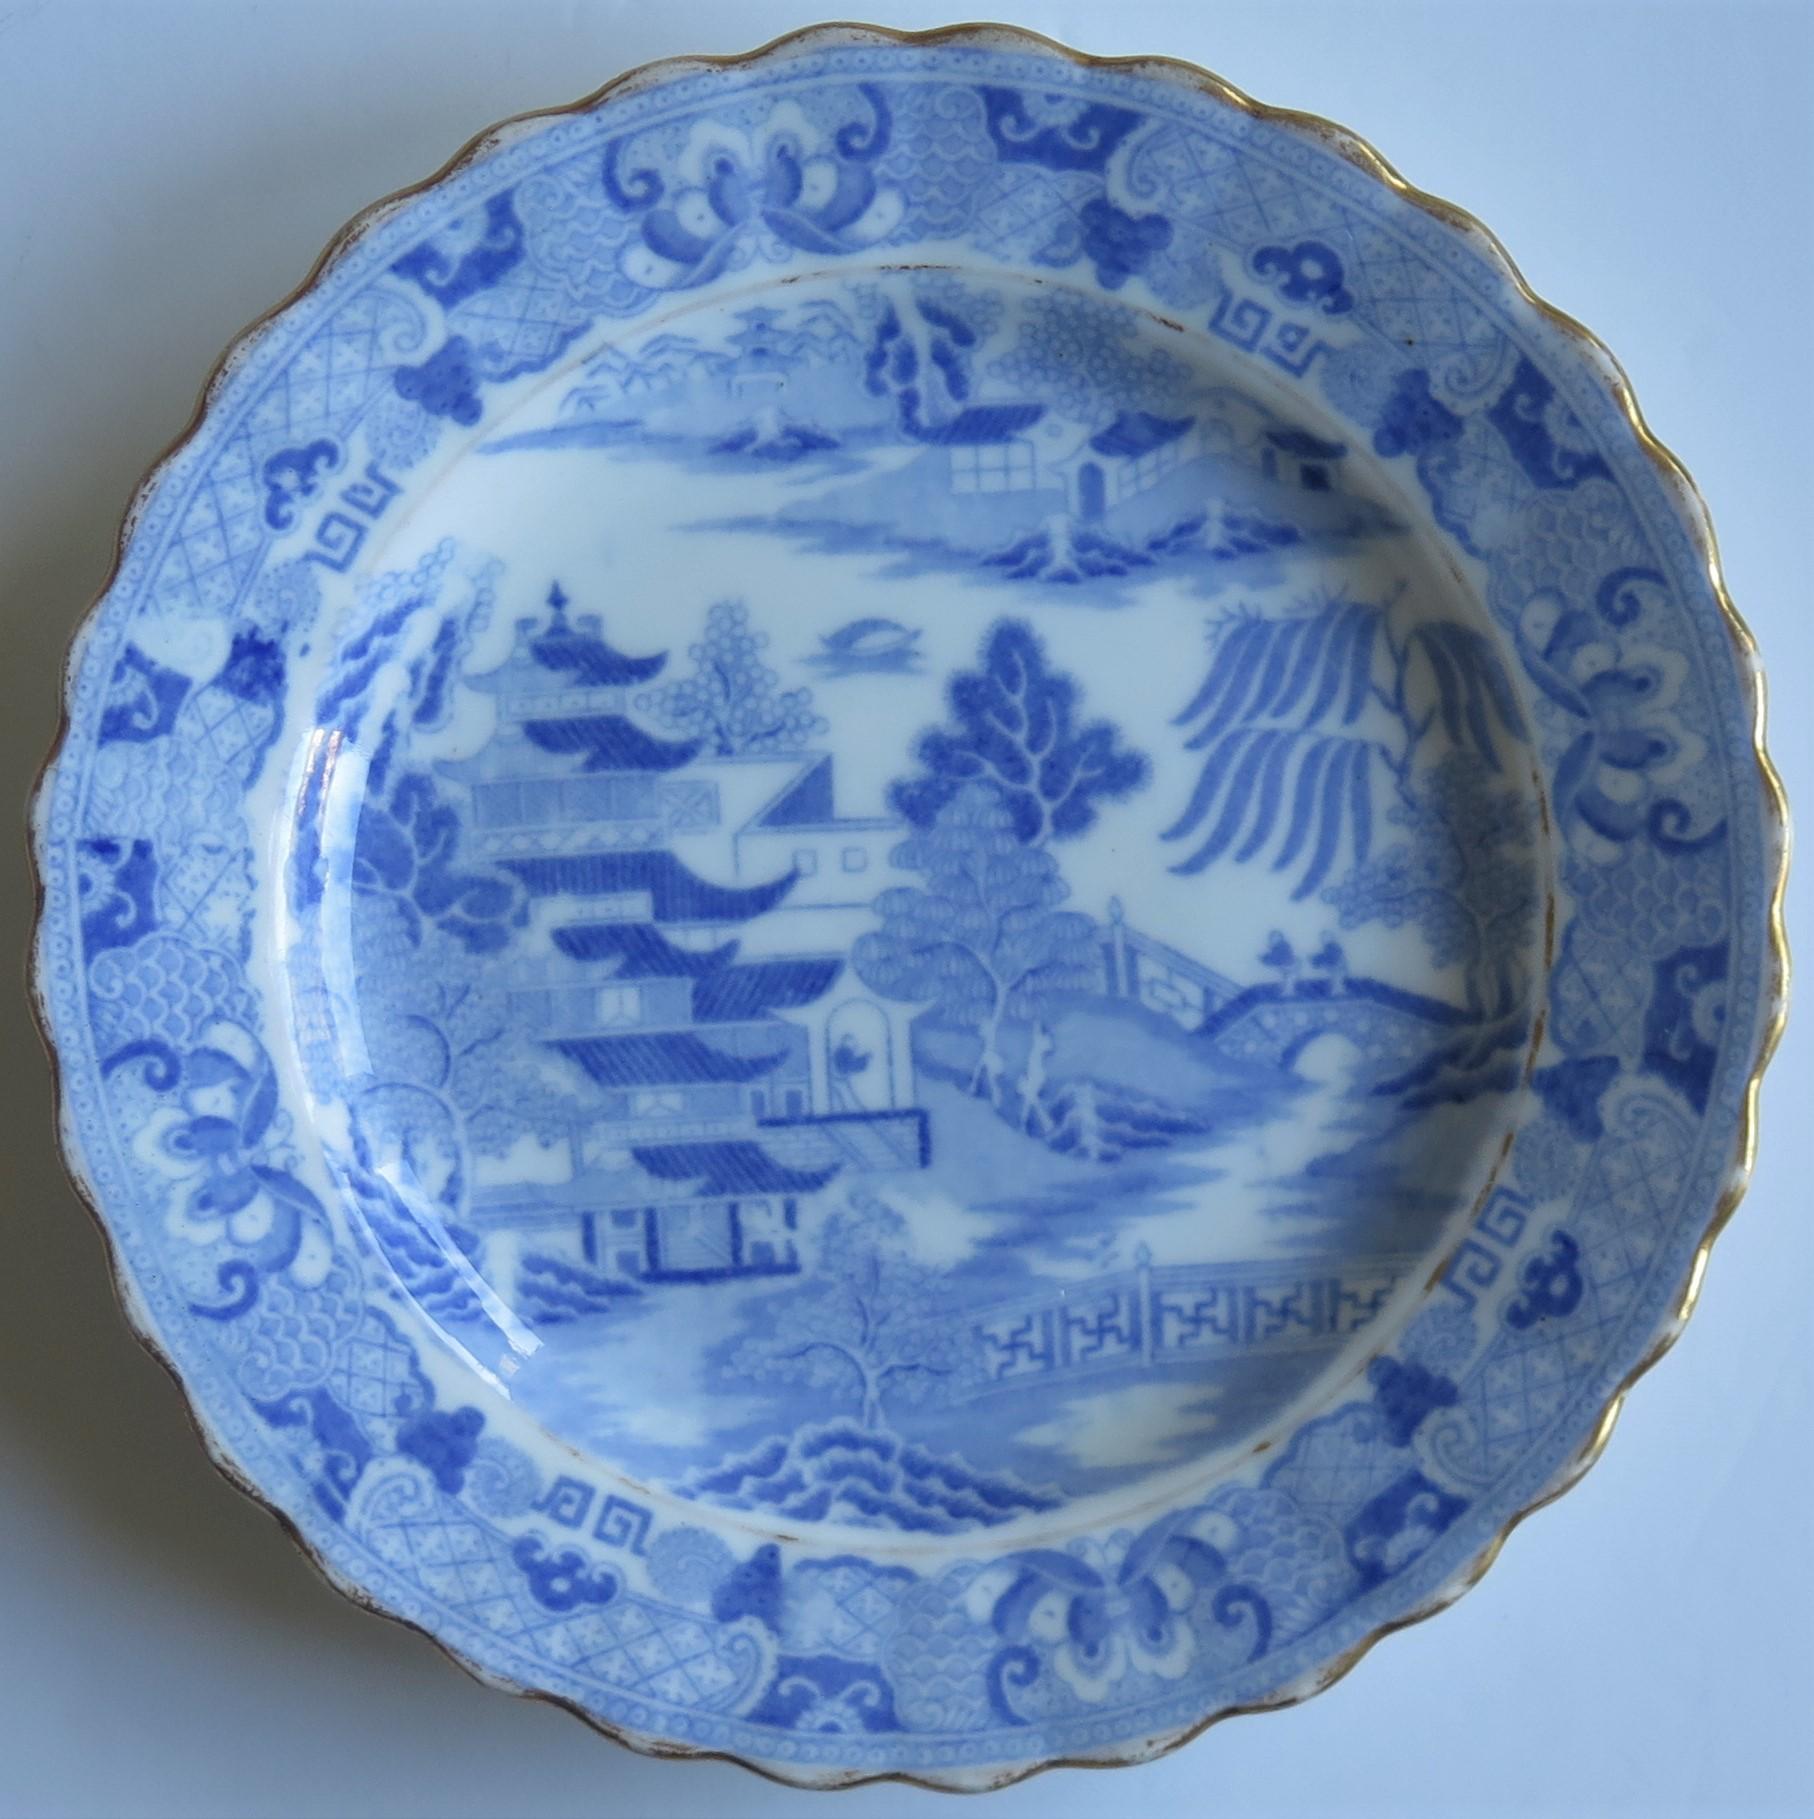 19th Century Early Miles Mason Desert Dish or Plate Blue and White Boy at the Door Pattern